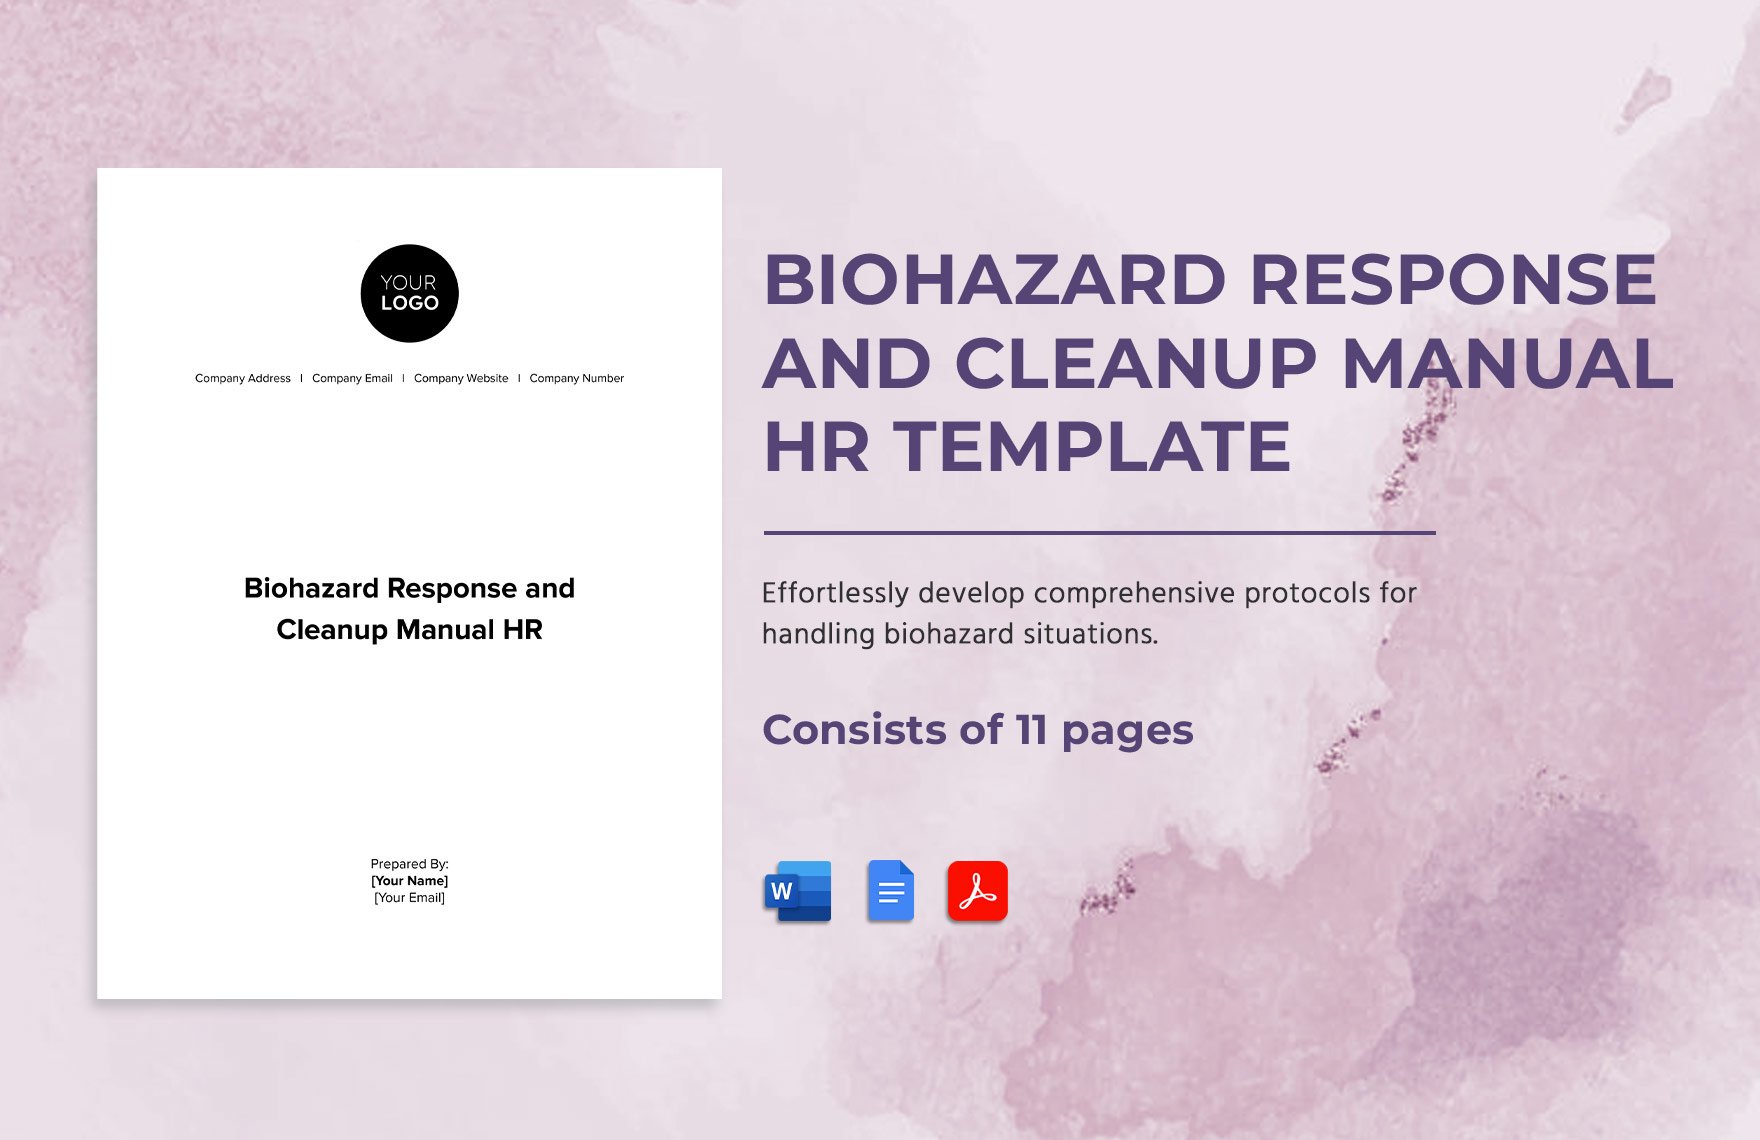 Biohazard Response and Cleanup Manual HR Template